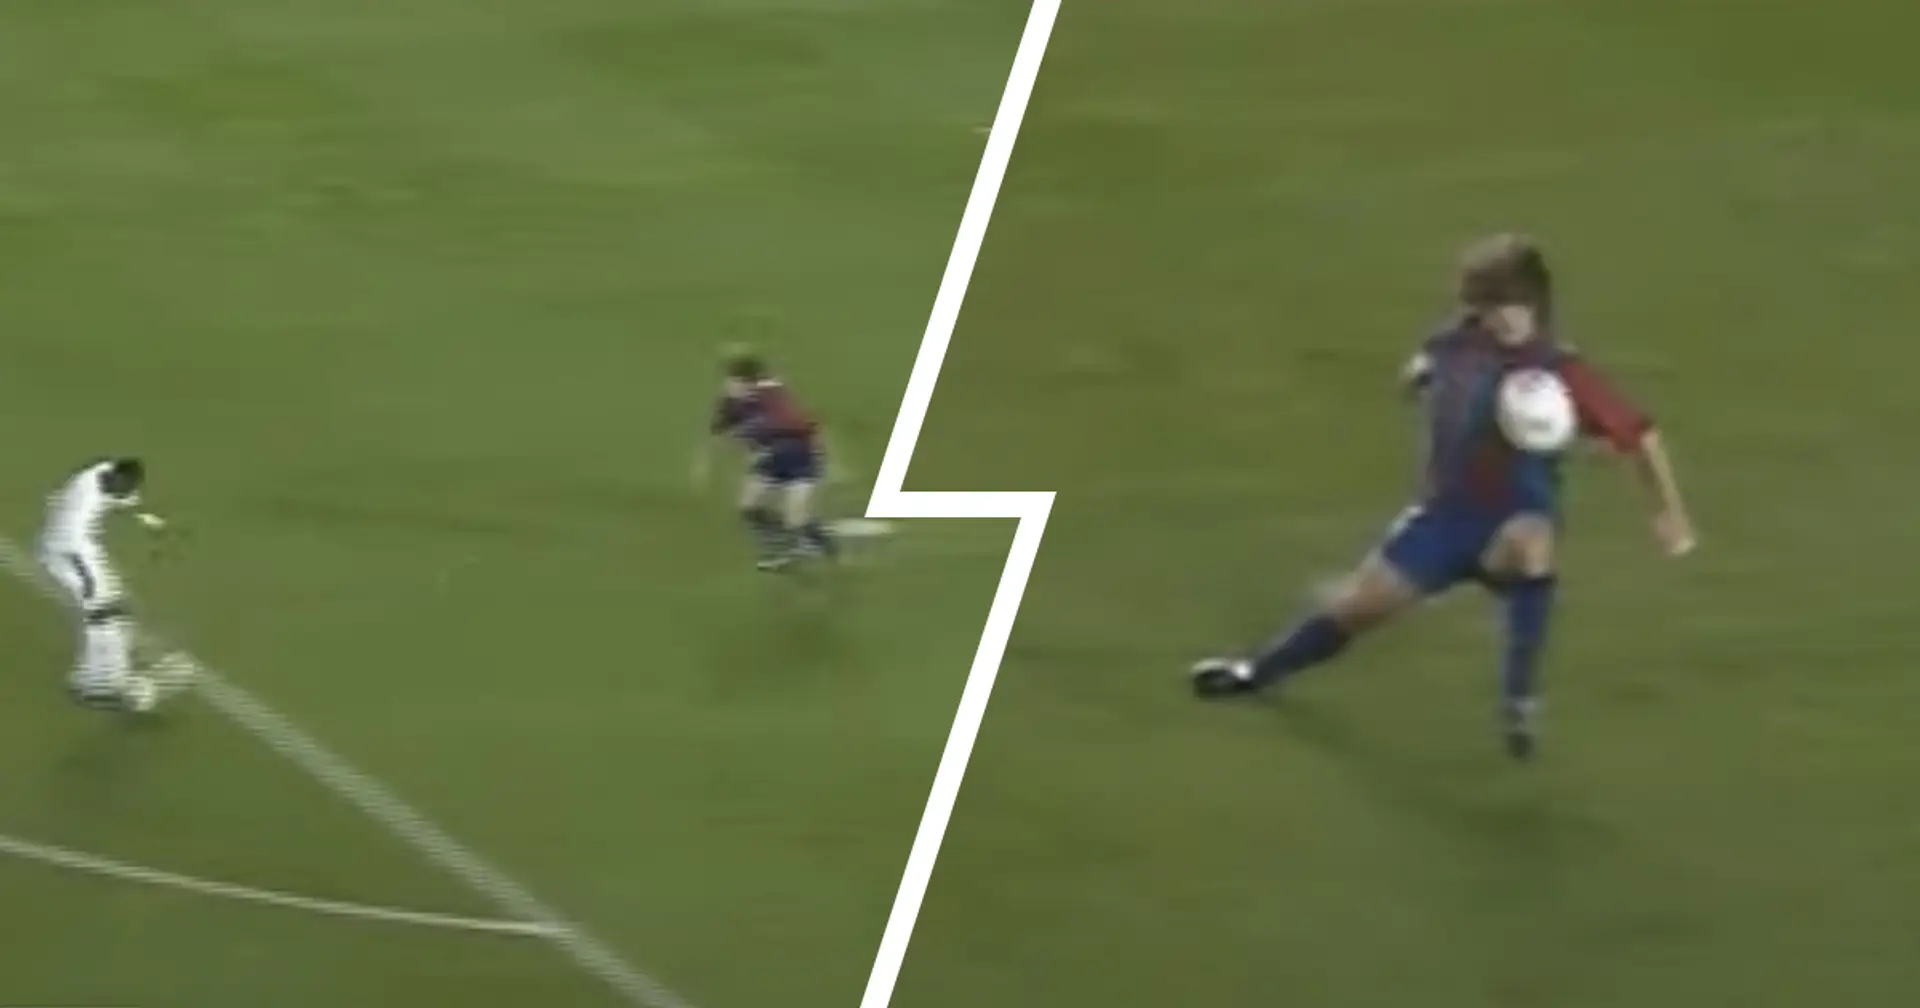 How Carles Puyol once covered for Barca goalkeeper to produce heroic save with his chest